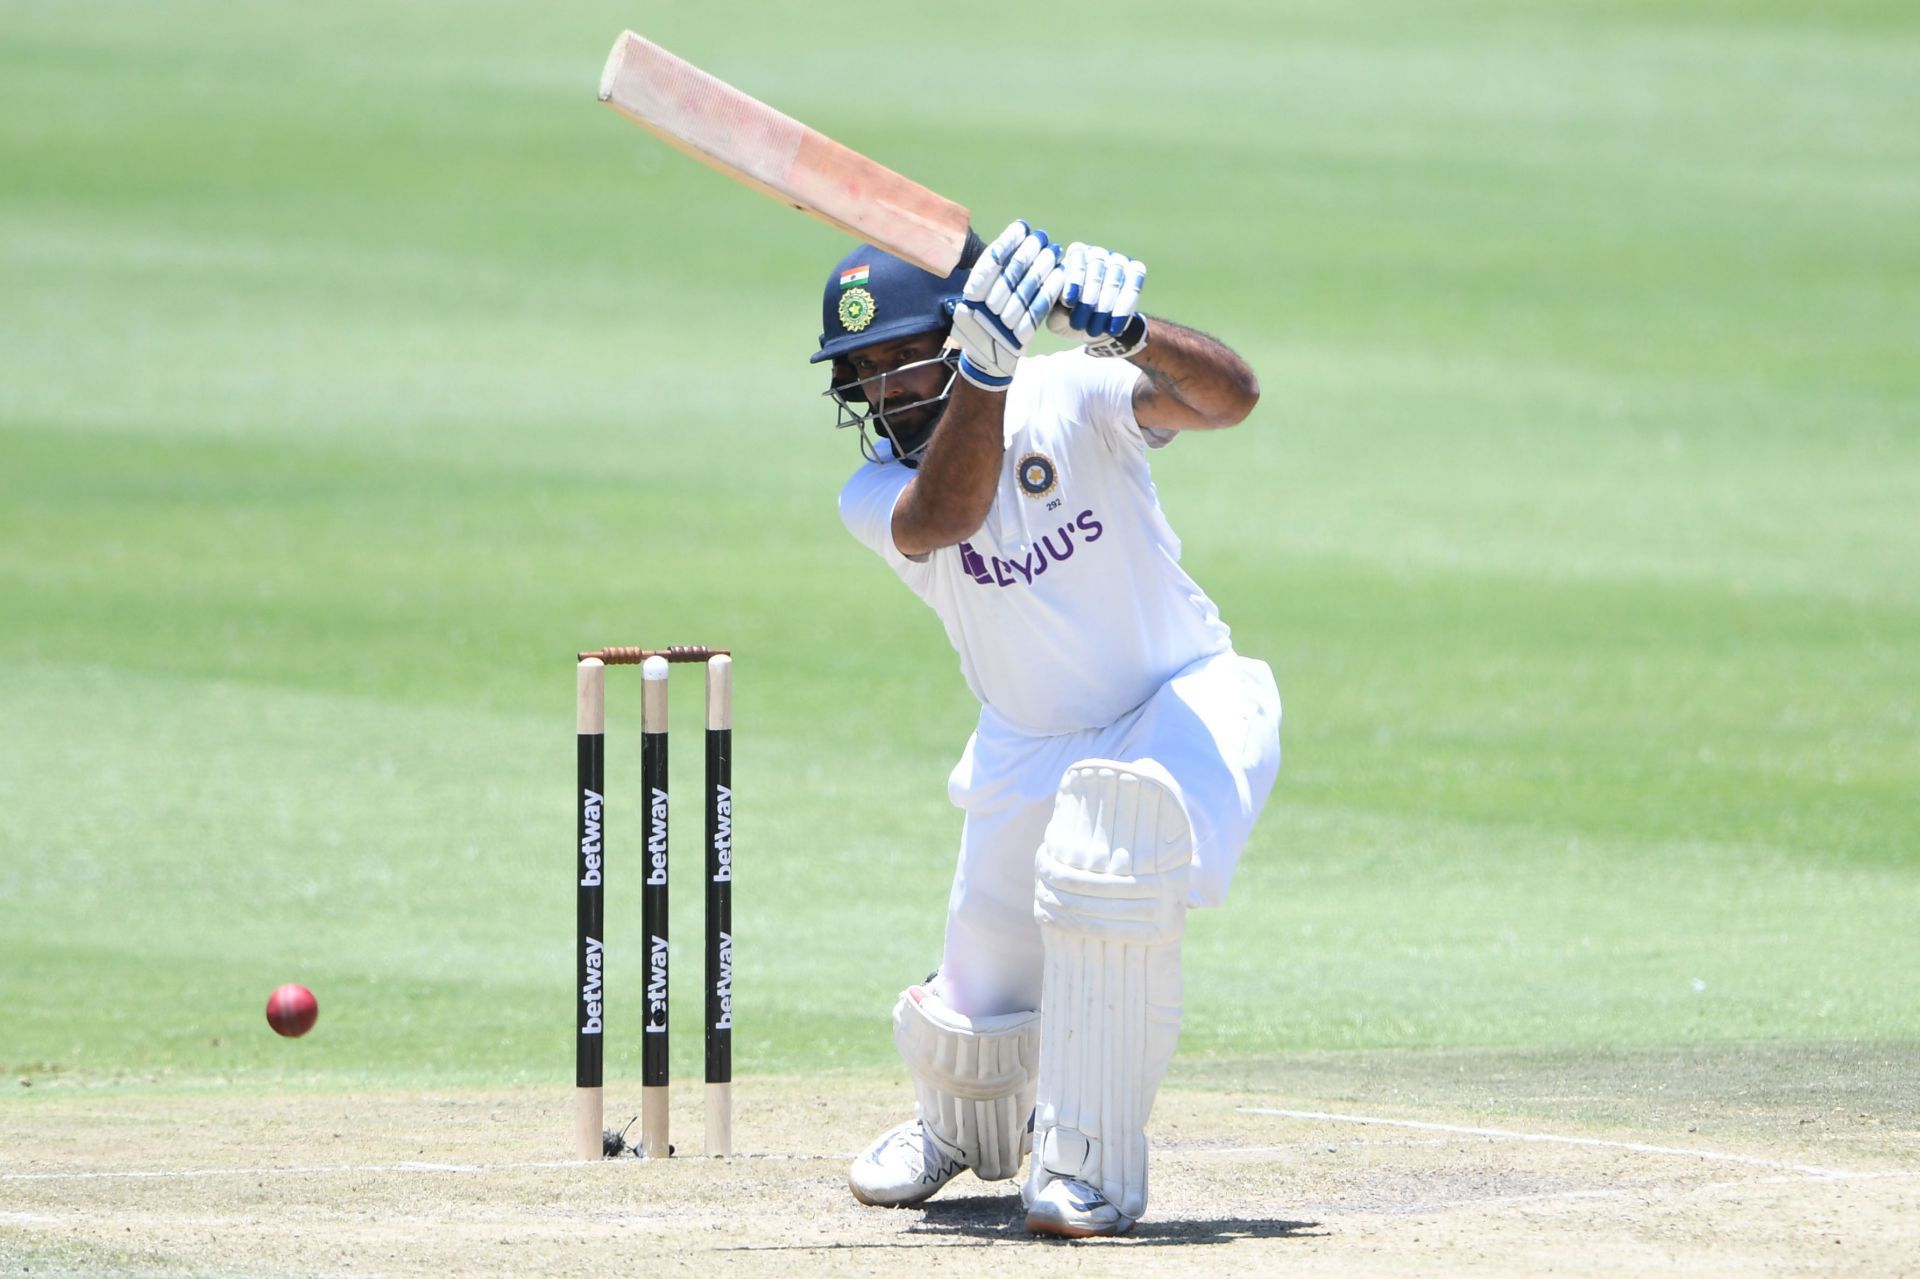 Hanuma Vihari gave a decent account of himself in the solitary Test he played in South Africa